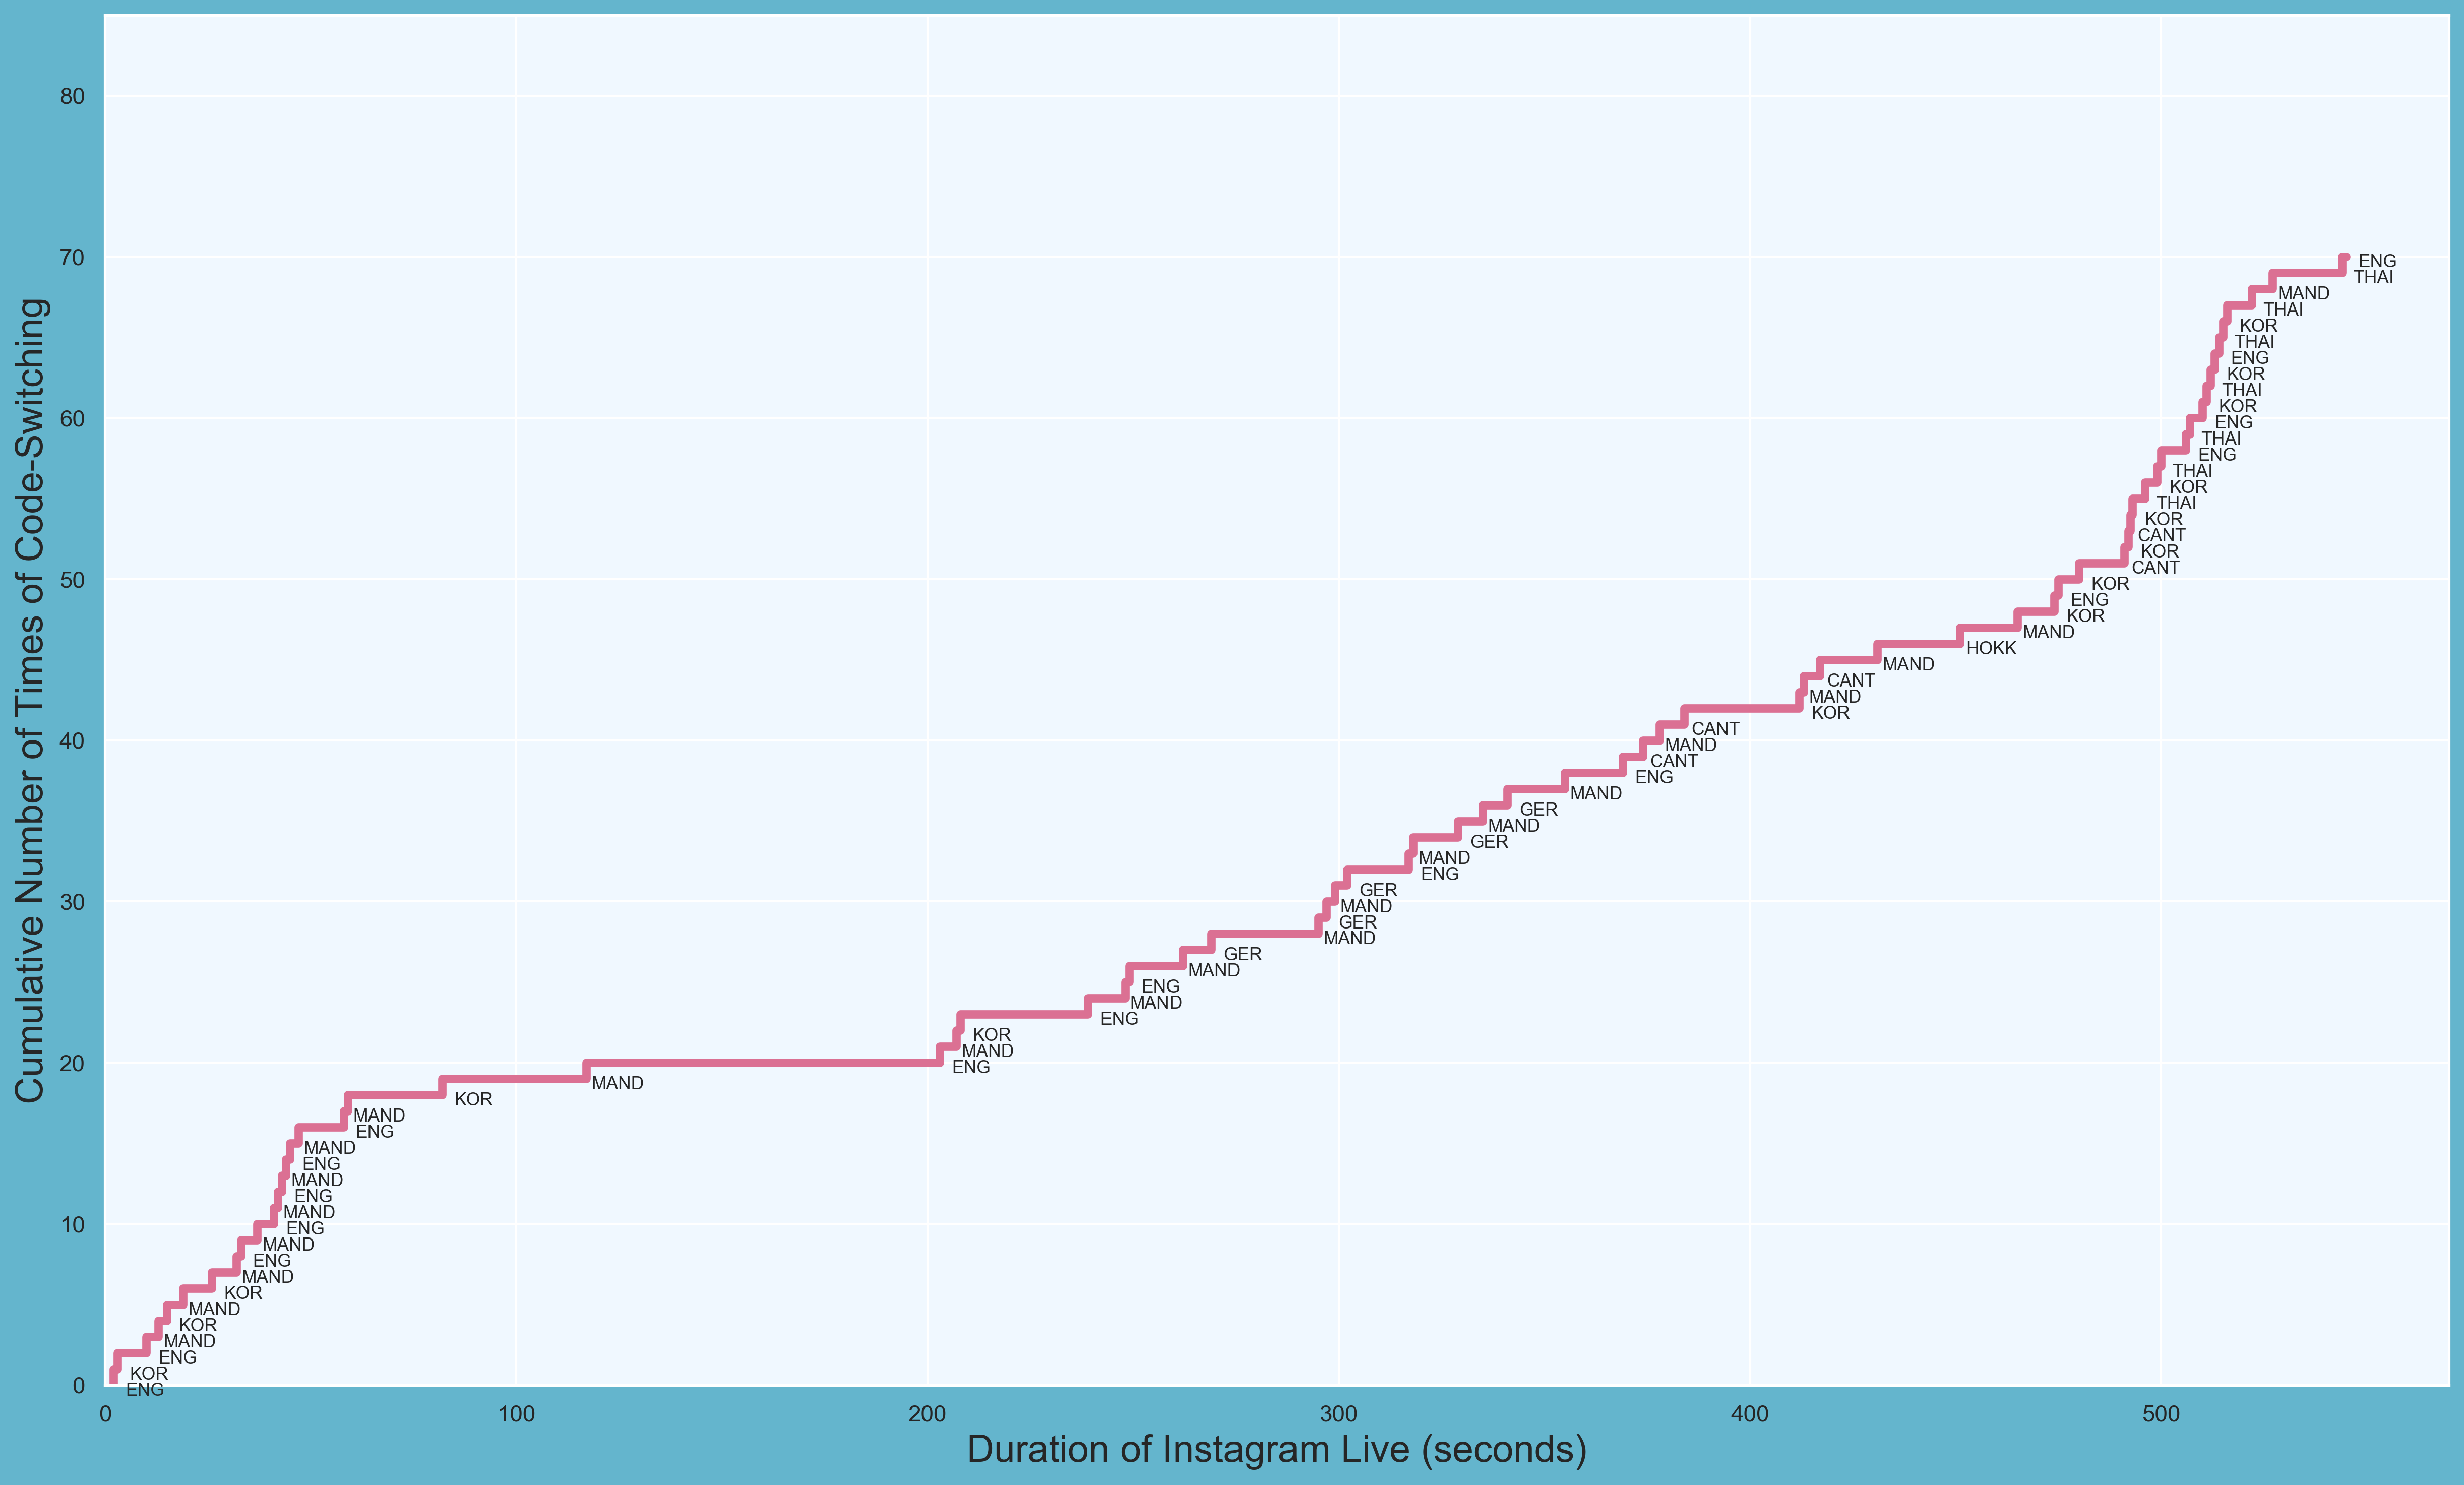 Language labels for each step on the graph. Languages include English, Korean, Mandarin, and German. The graph has the ‘cumulative number of times of code-switching’ values on the y-axis and the ‘duration of Instagram Live (in seconds)’ values on the x-axis showing a step chart line (in pink) for Hendery.